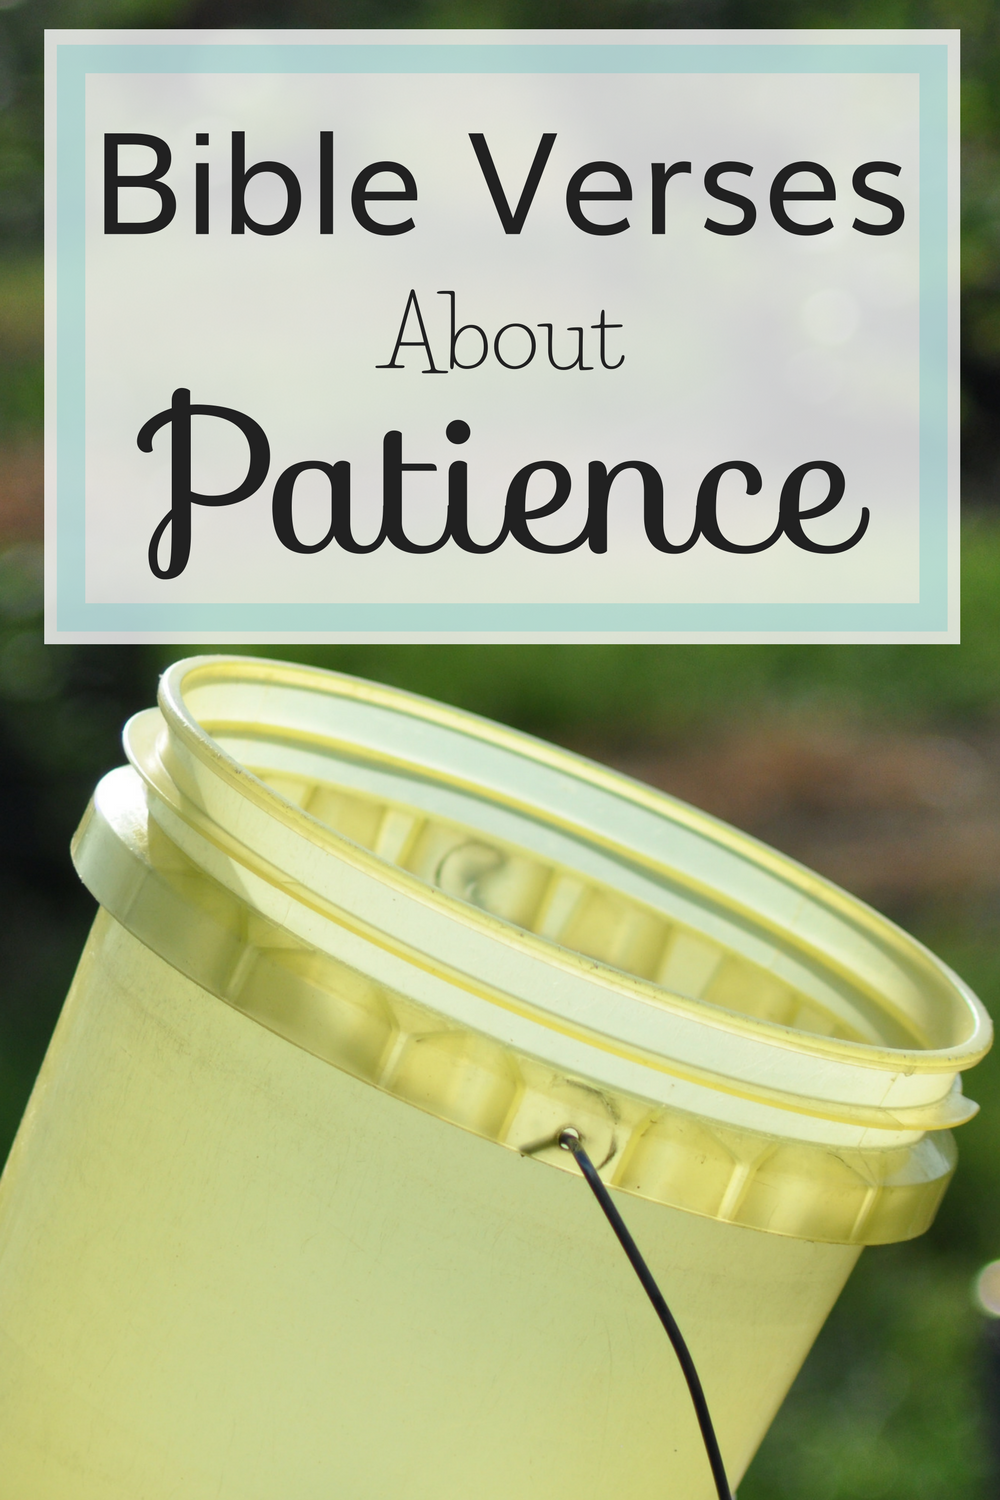 Bible verses about patience can give us the wisdom and counsel needed to strengthen the virtue of patience within us.